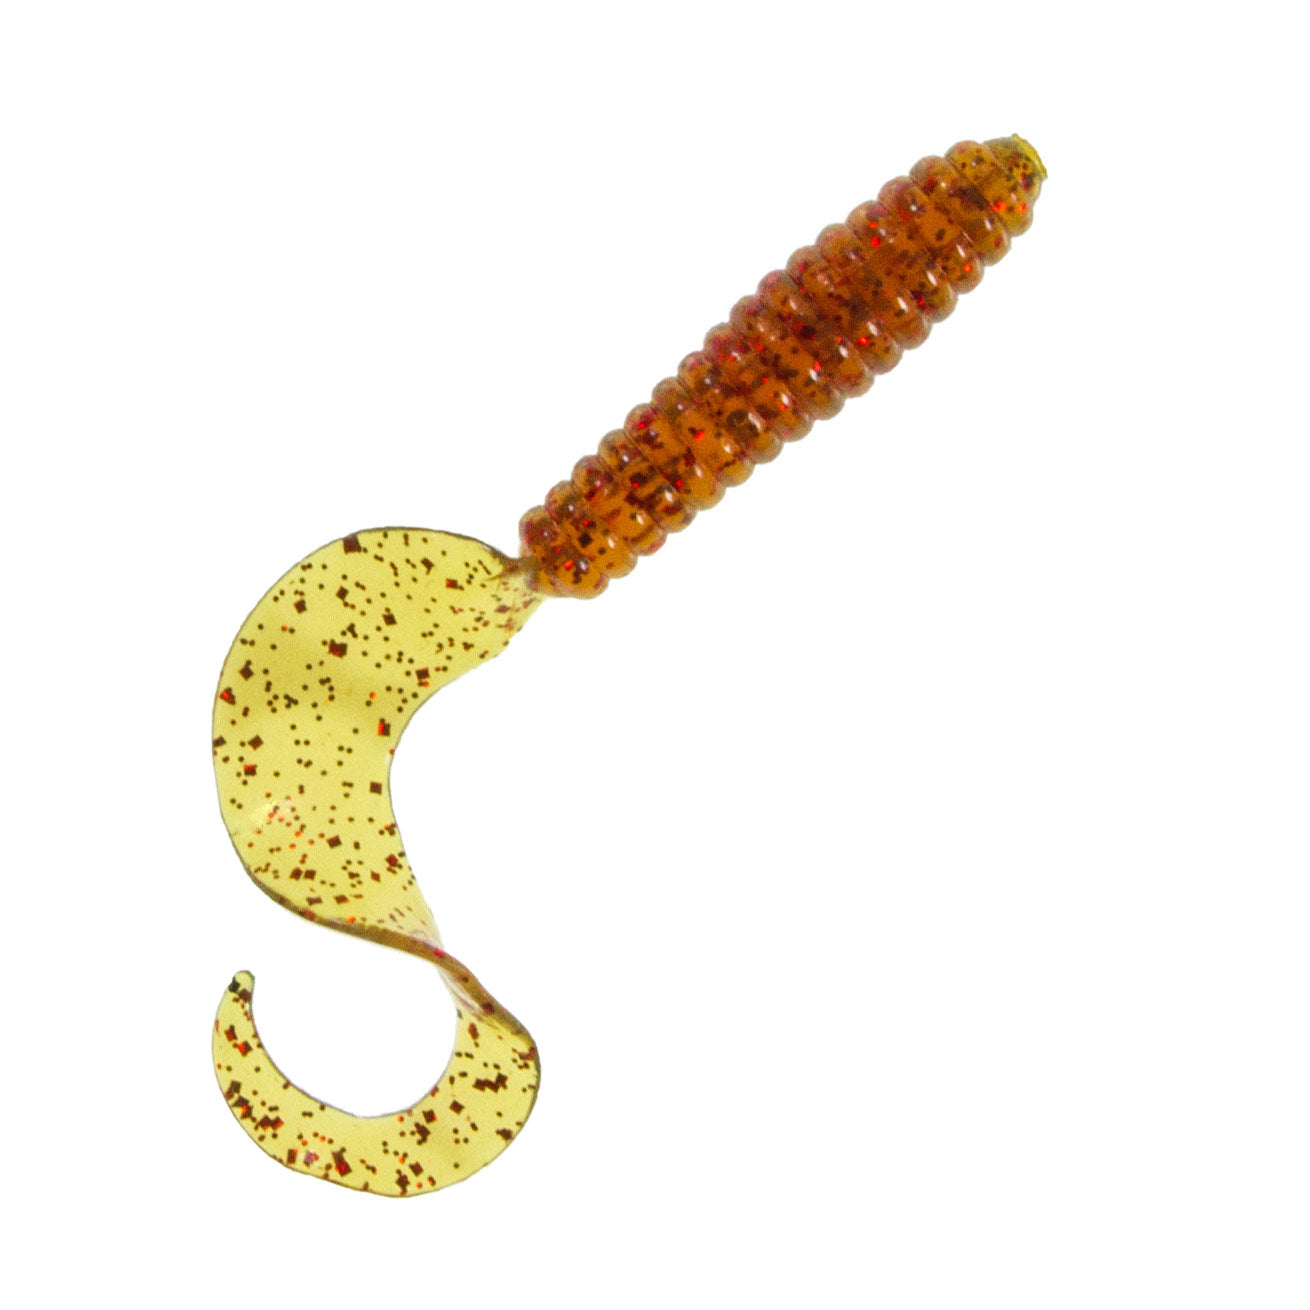 4 Curly Tail Grub (12 pack) – Rite Angler